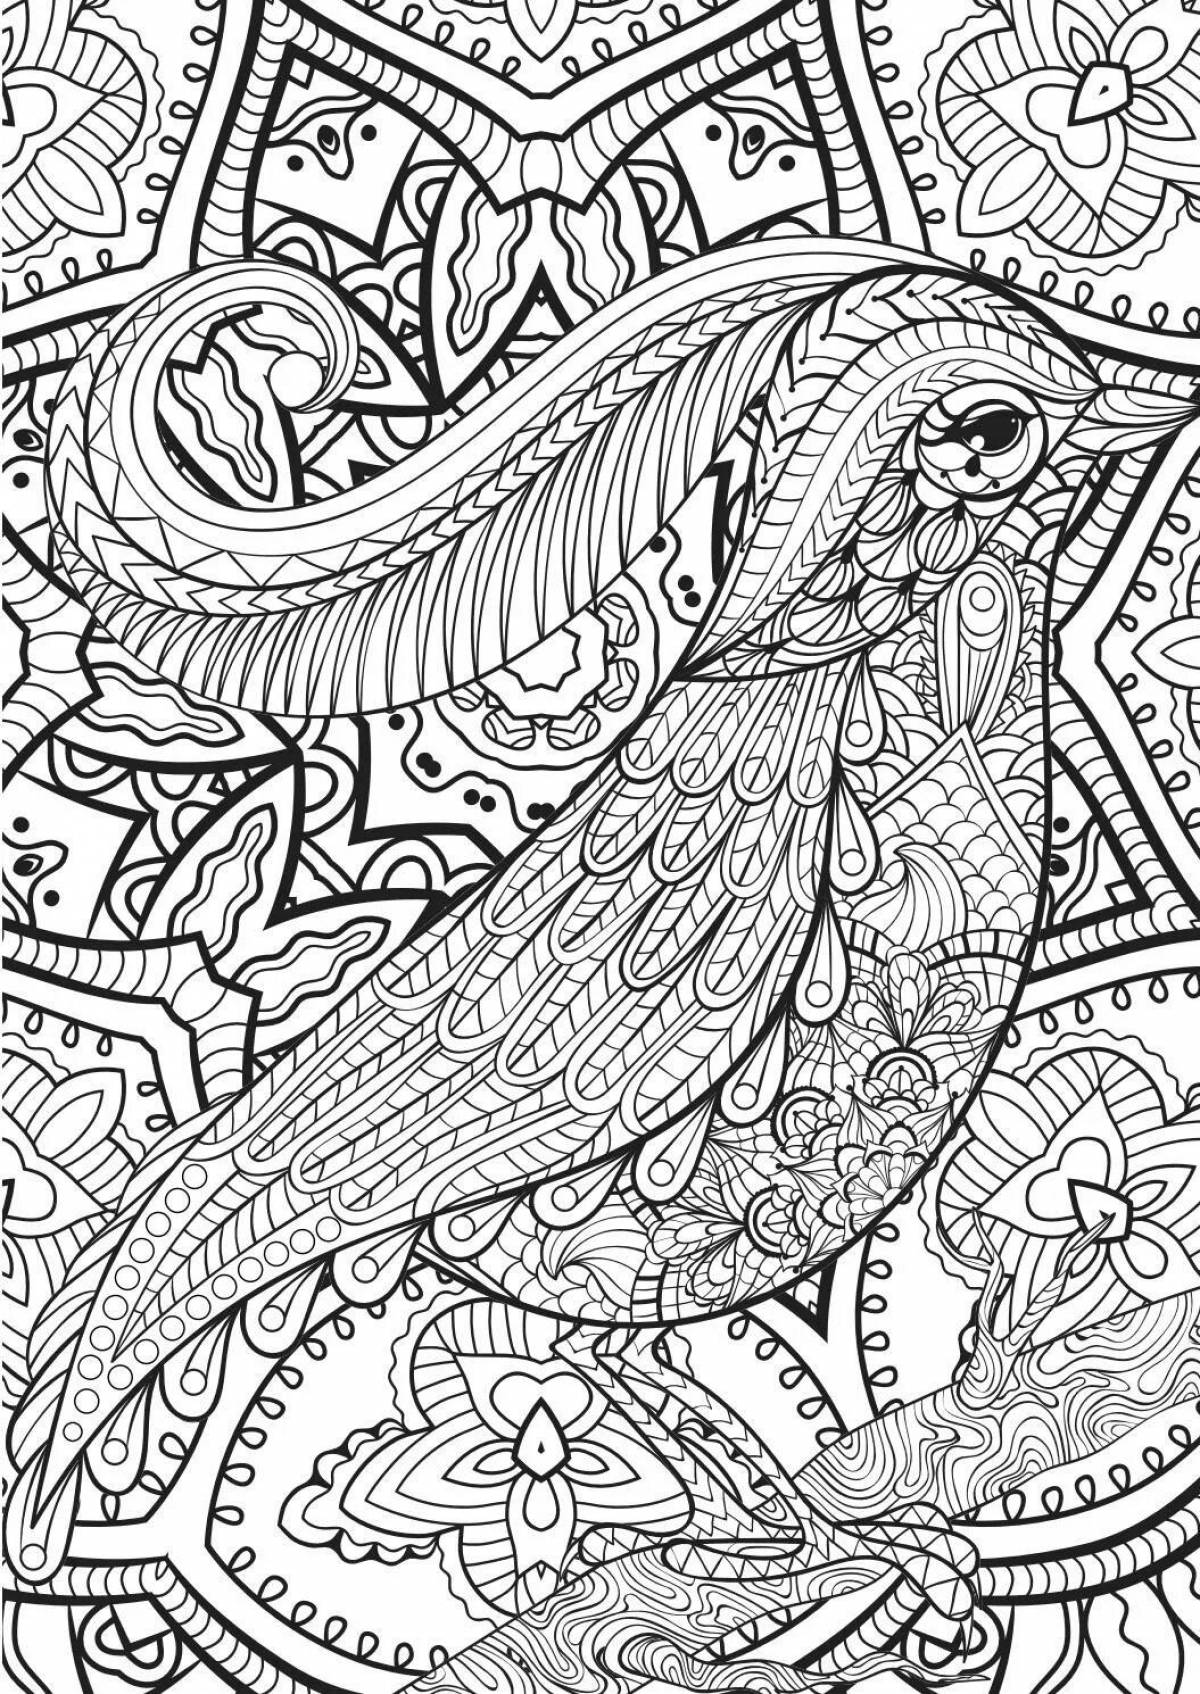 Energy anti-stress coloring book